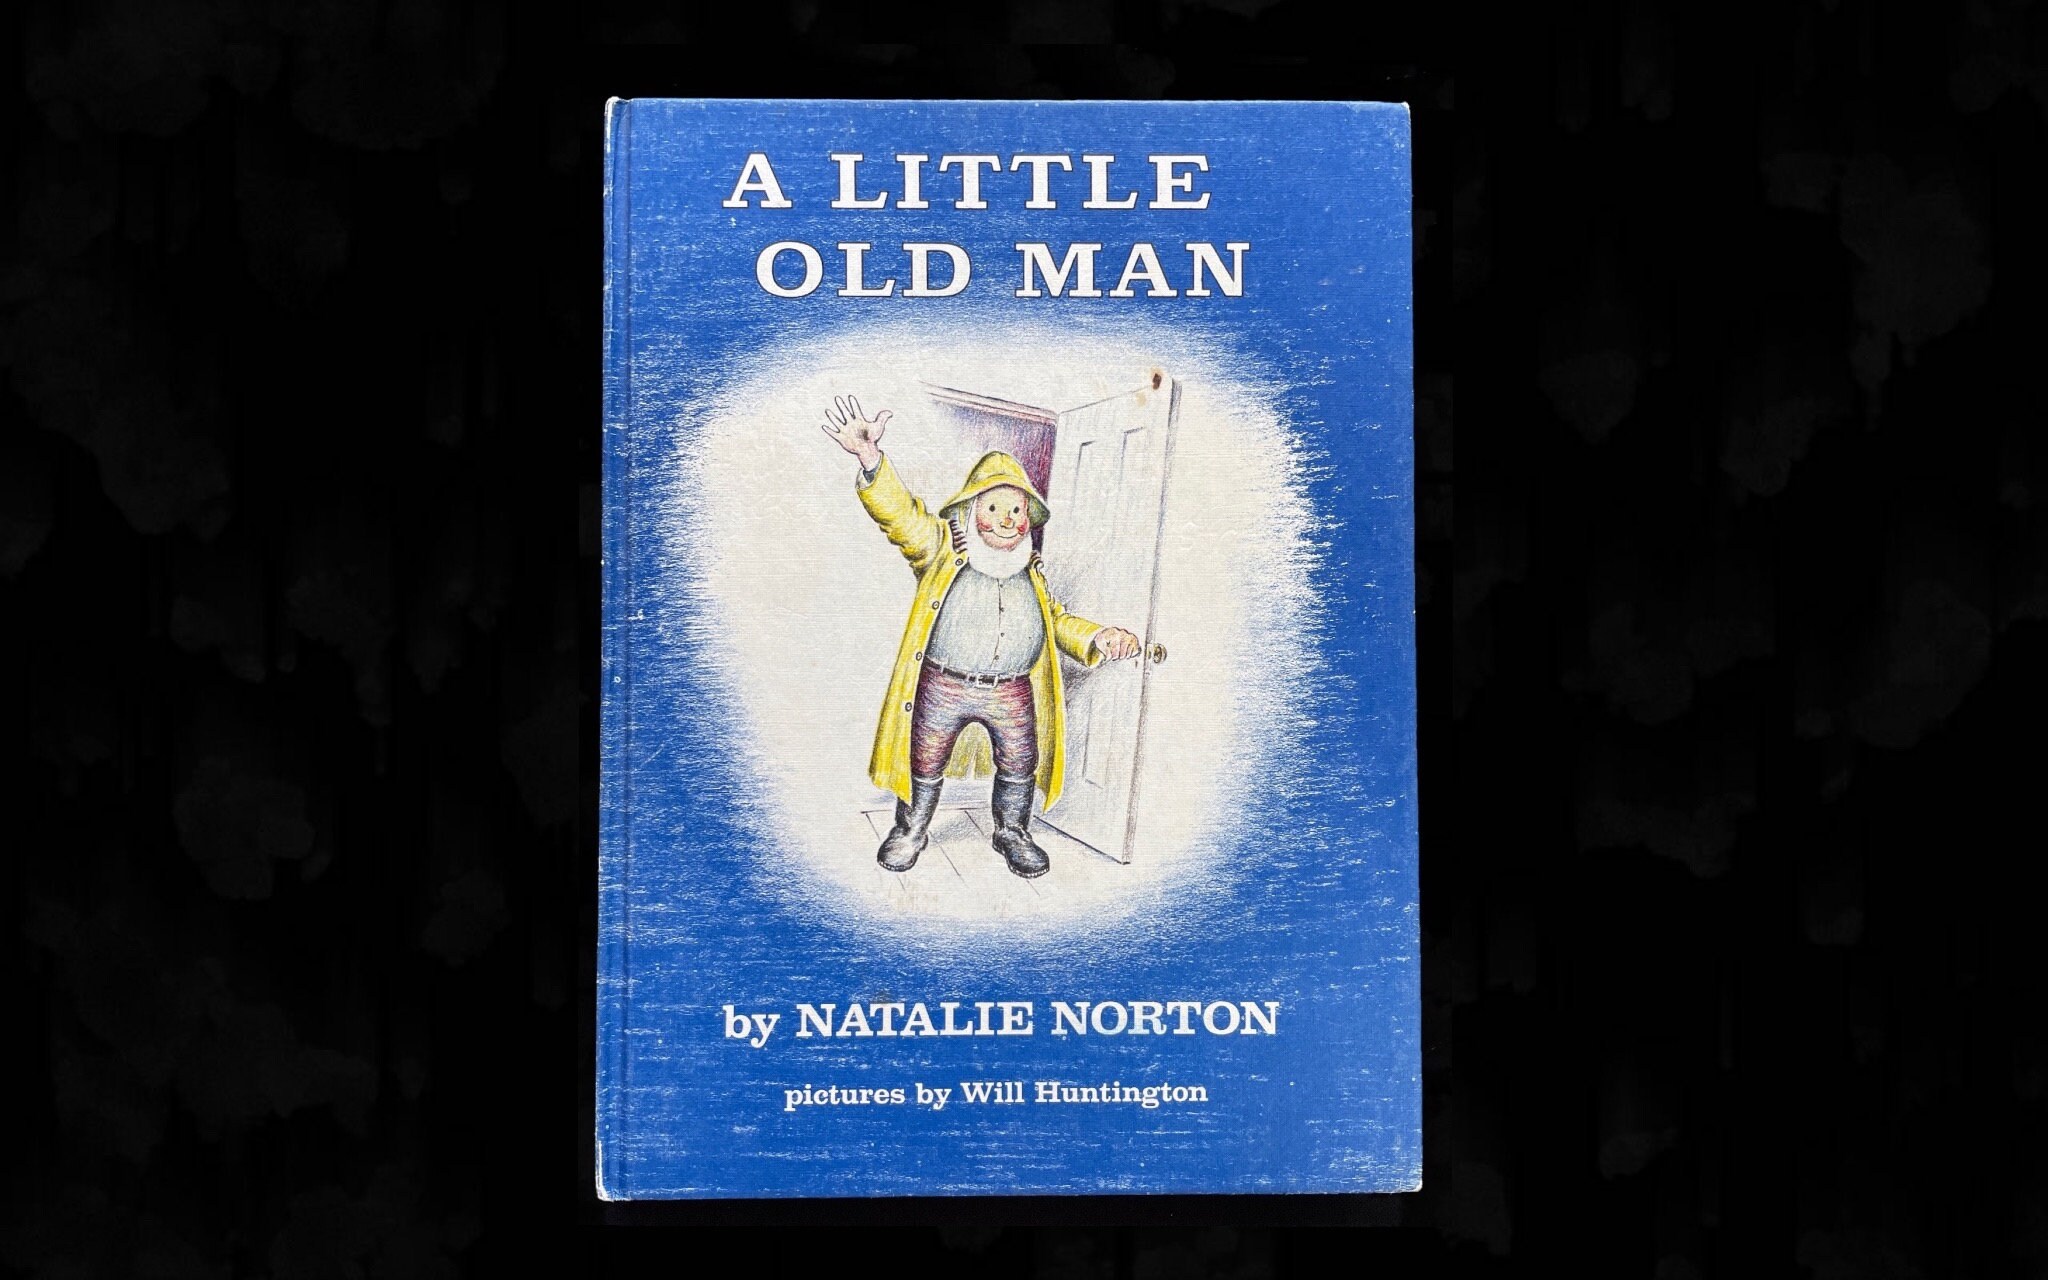 1959 / A Little Old Man / by Natalie NortonFREE shipping!